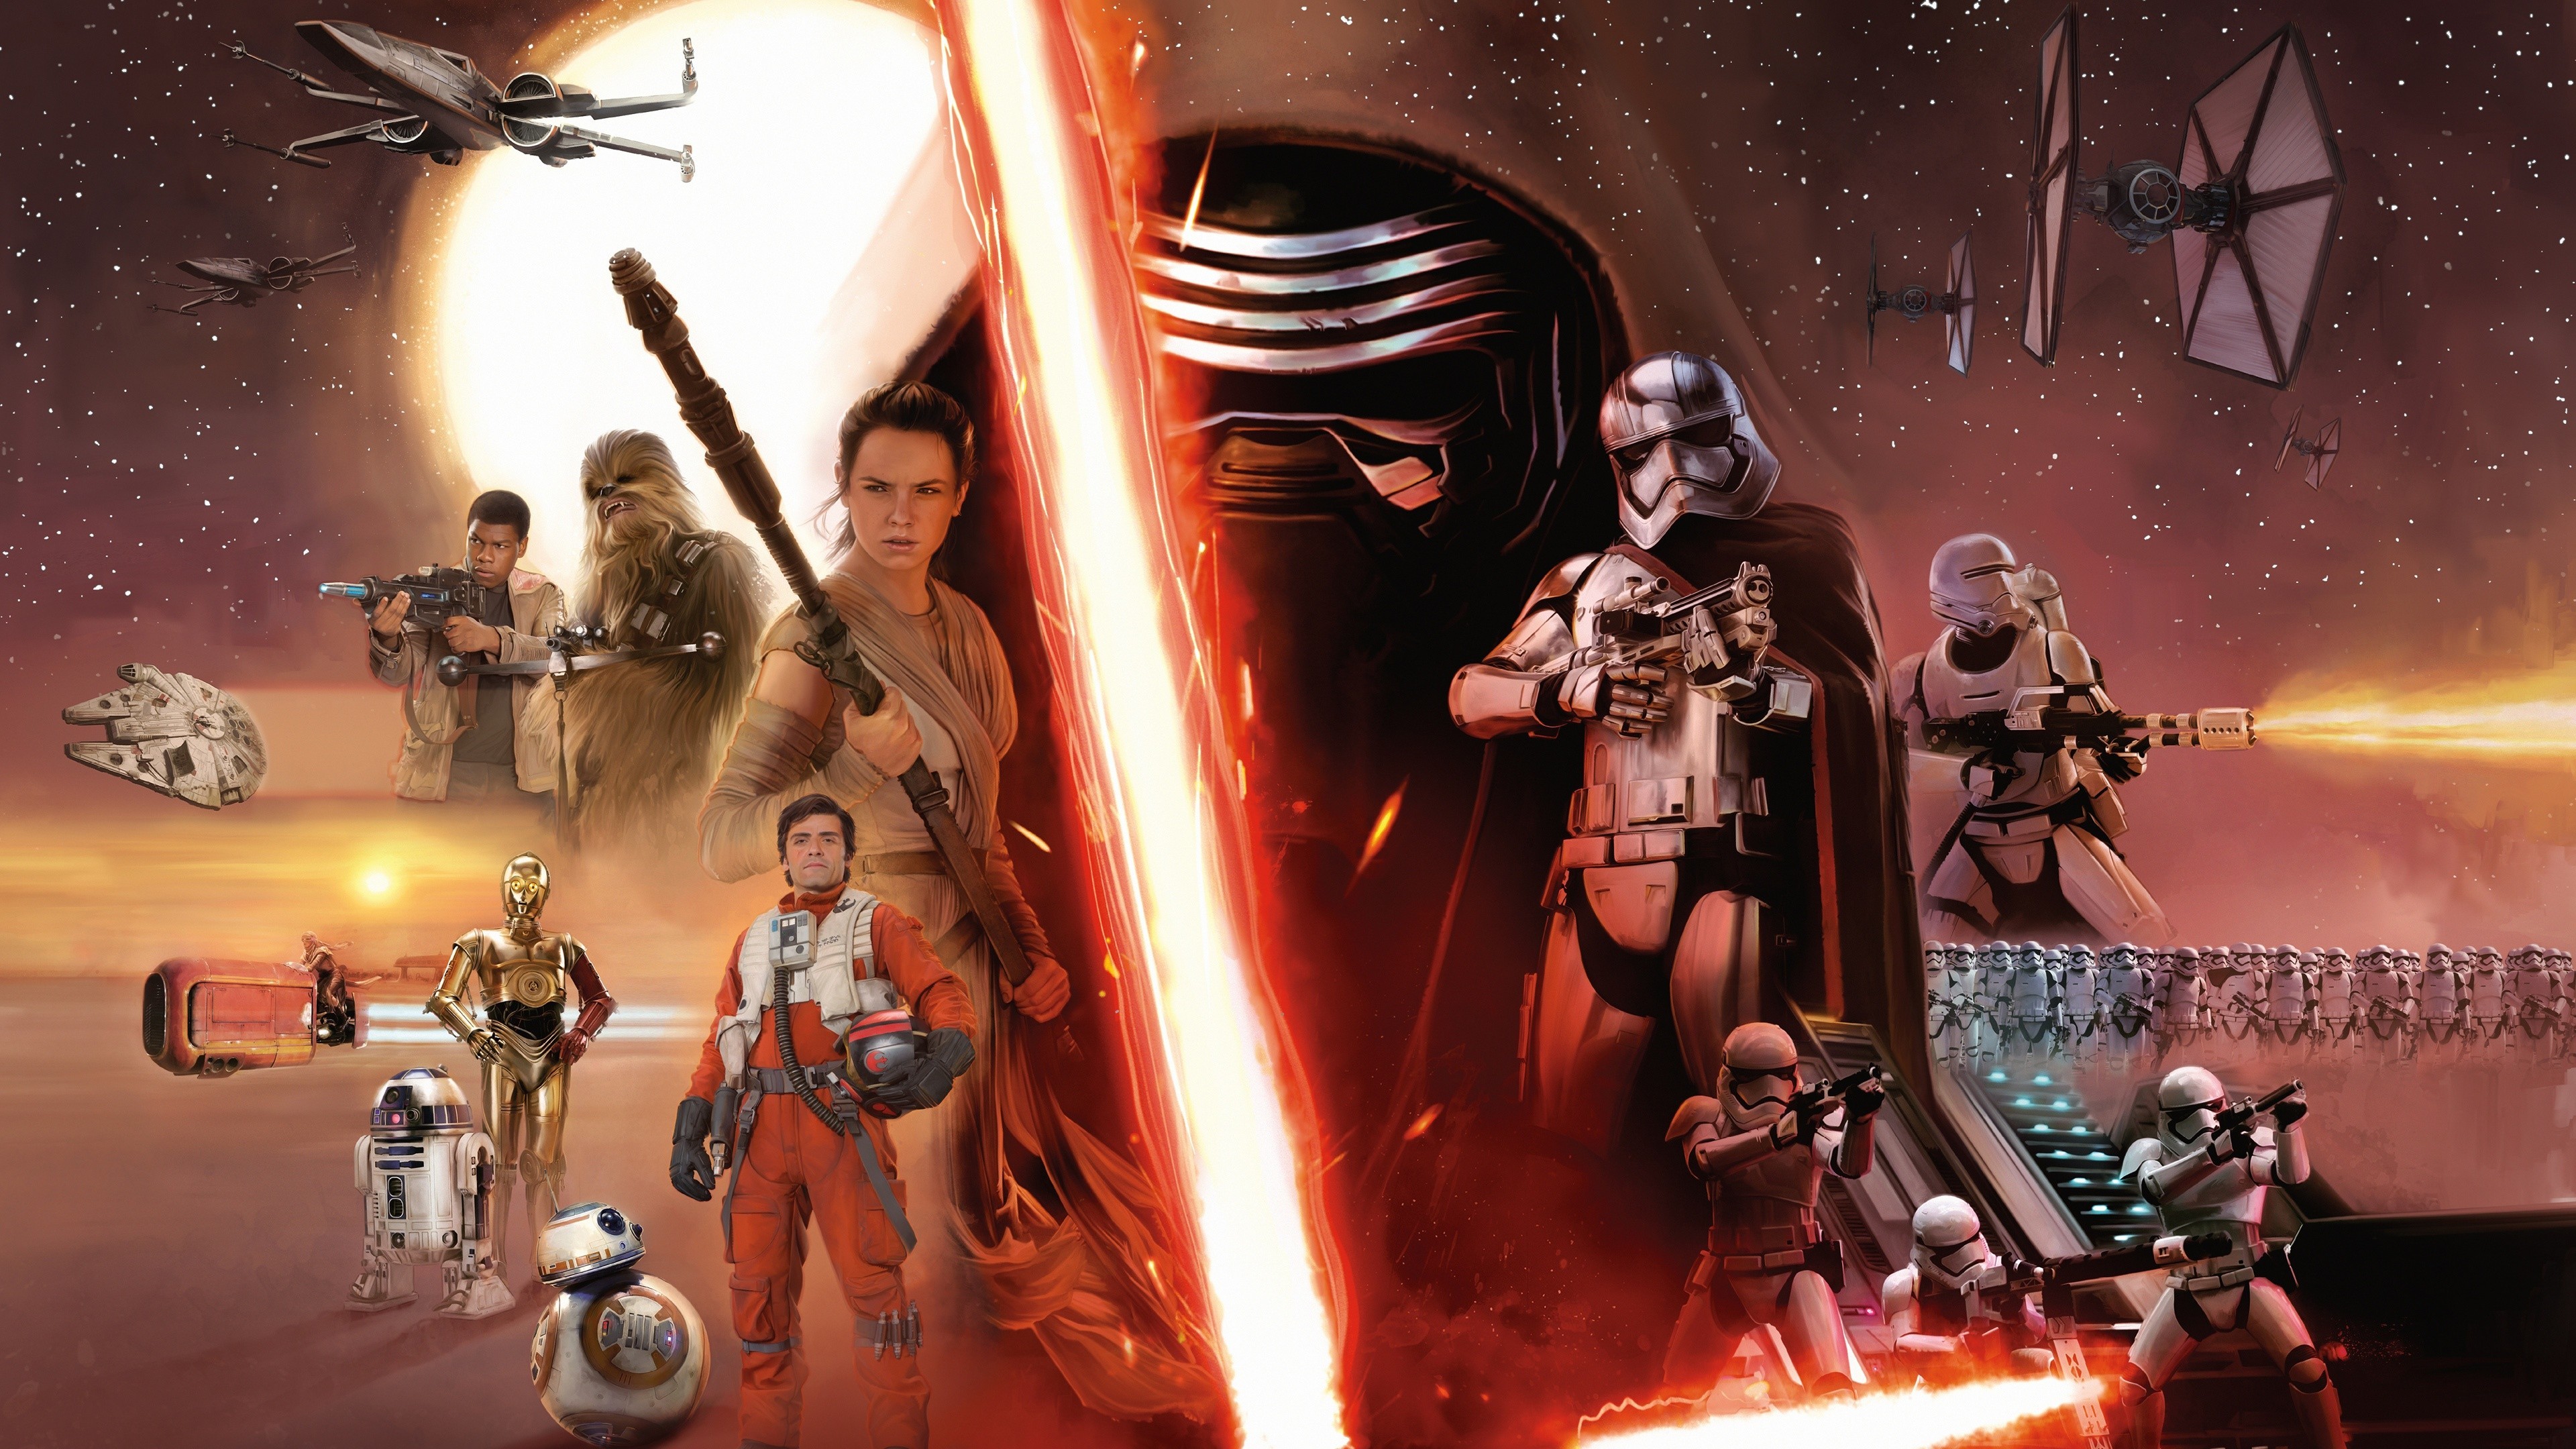 3840x2160 12 future Star Wars plots set up by 'The Force Awakens:' VERY interesting  questions here.